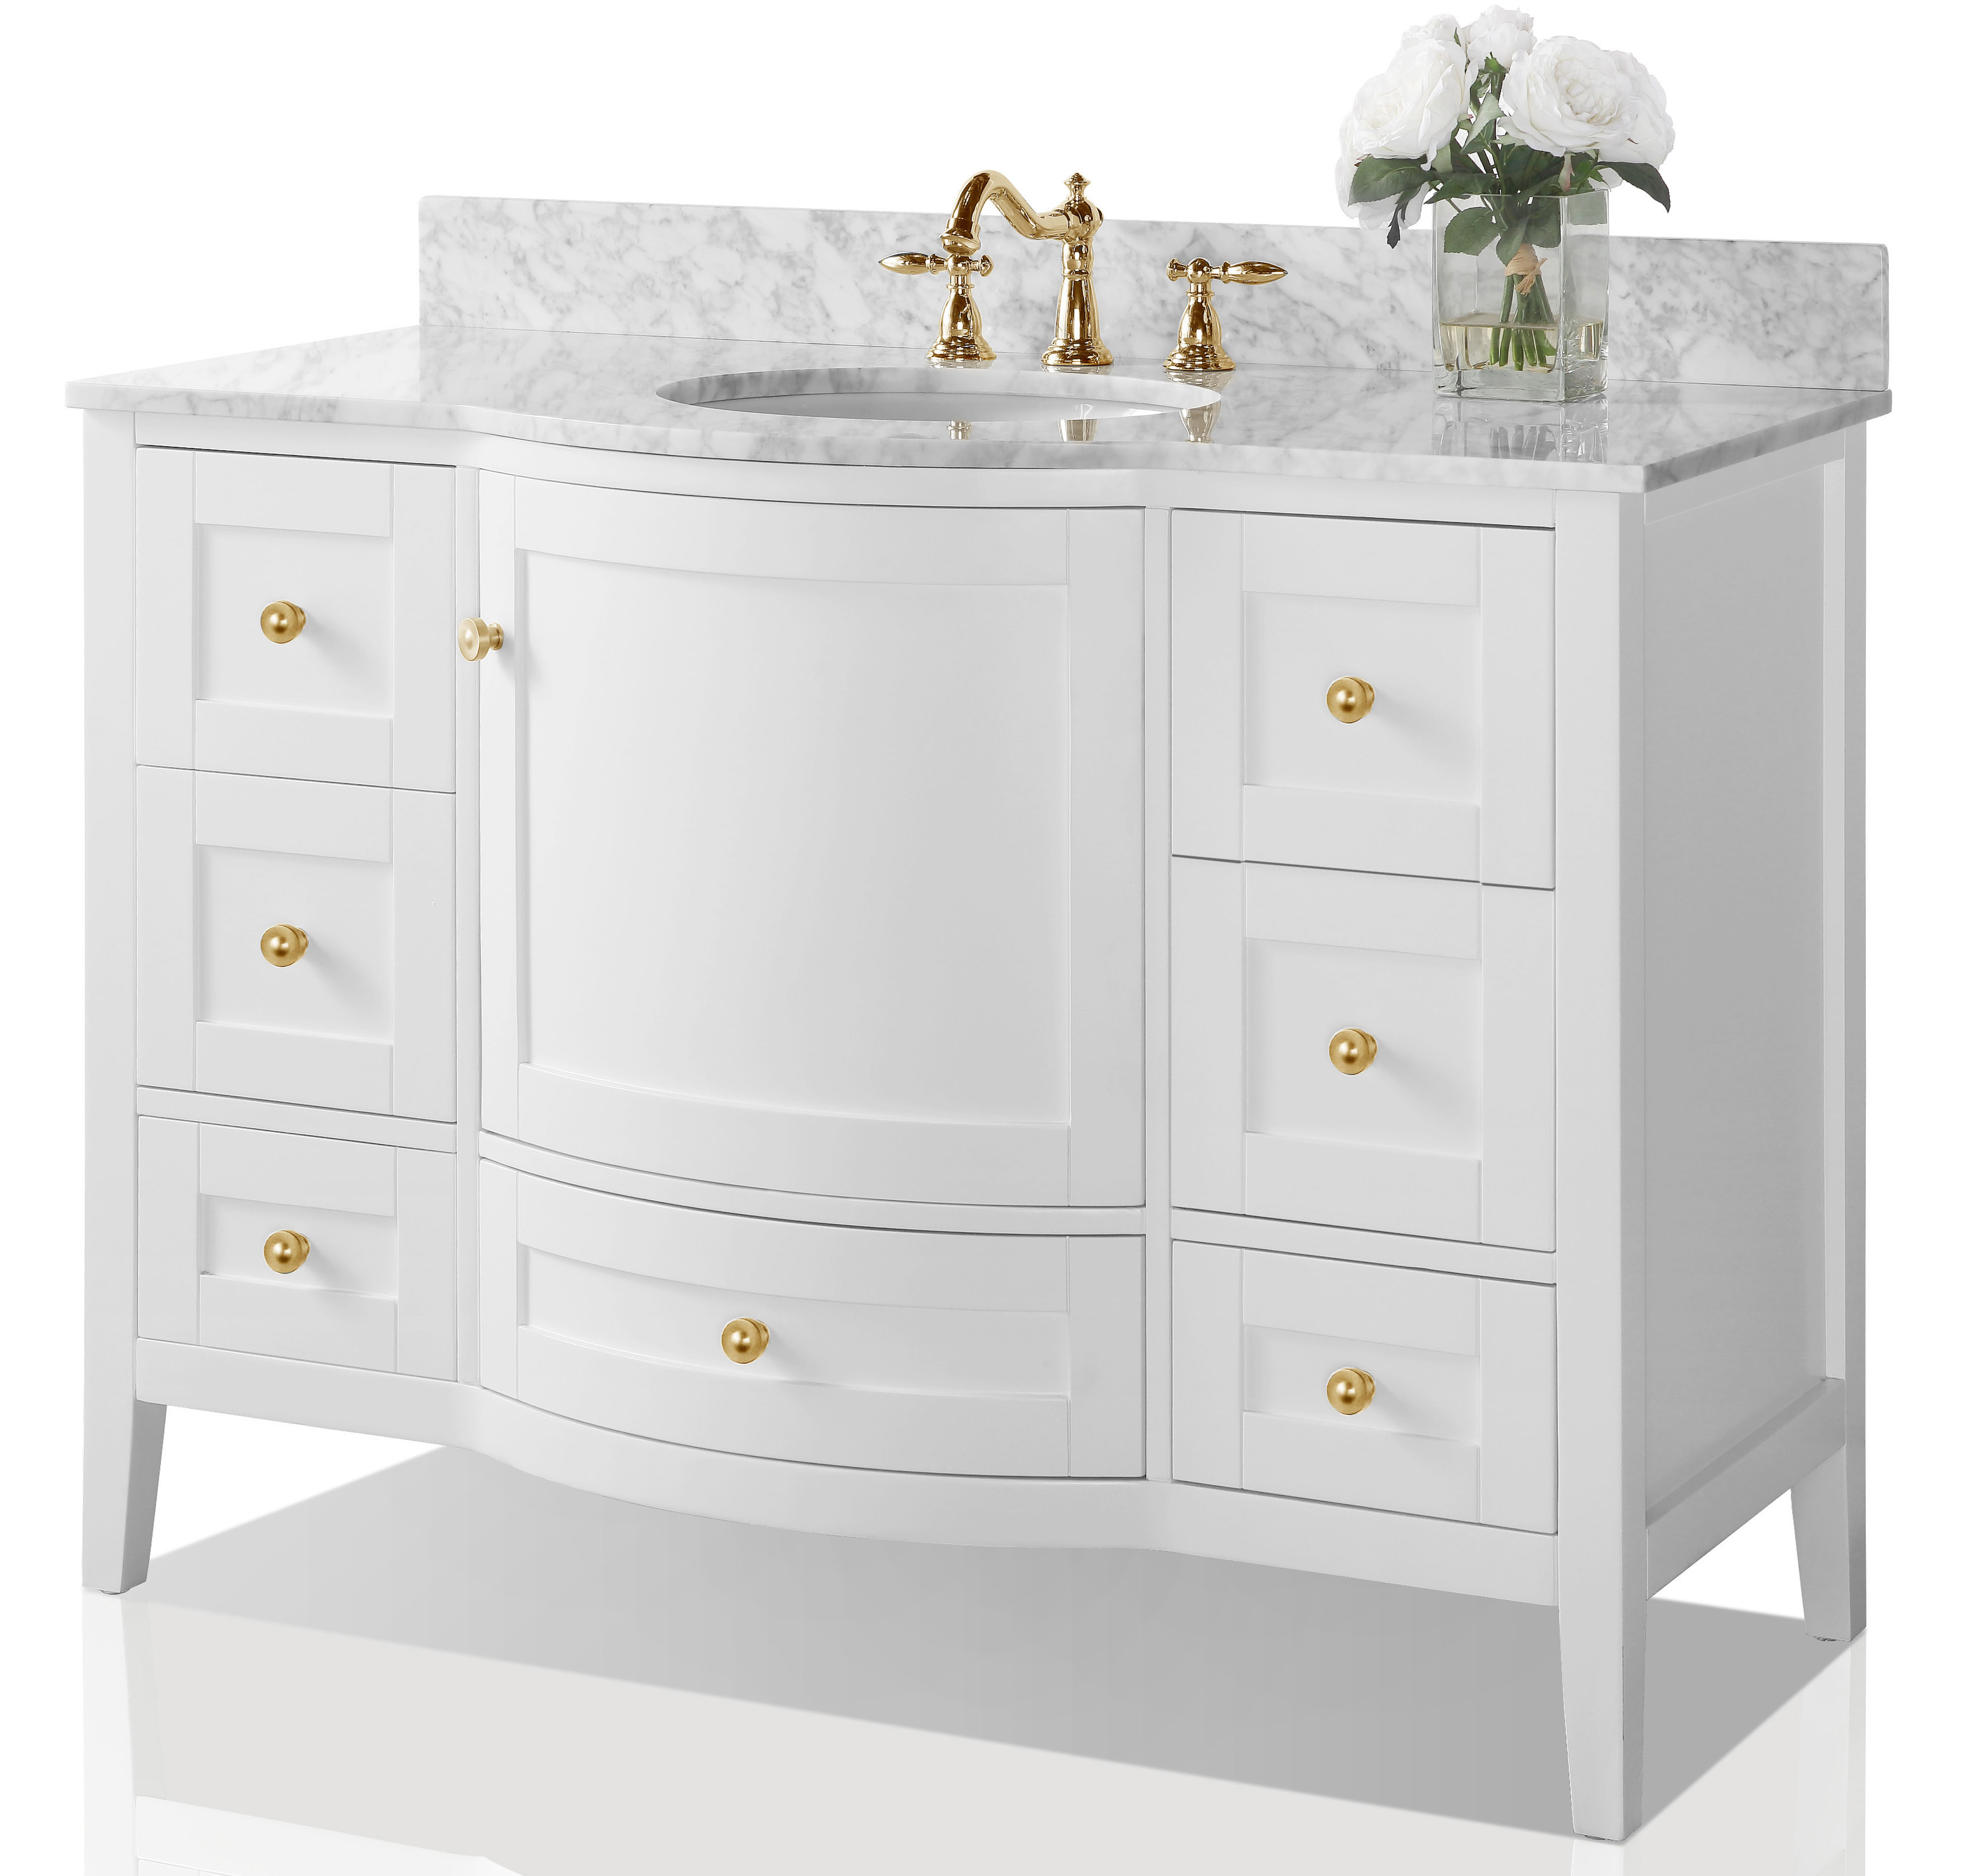 48" Single Sink Bath Vanity Set in White with Italian Carrara White Marble Vanity Top and 3 Hardware Options 